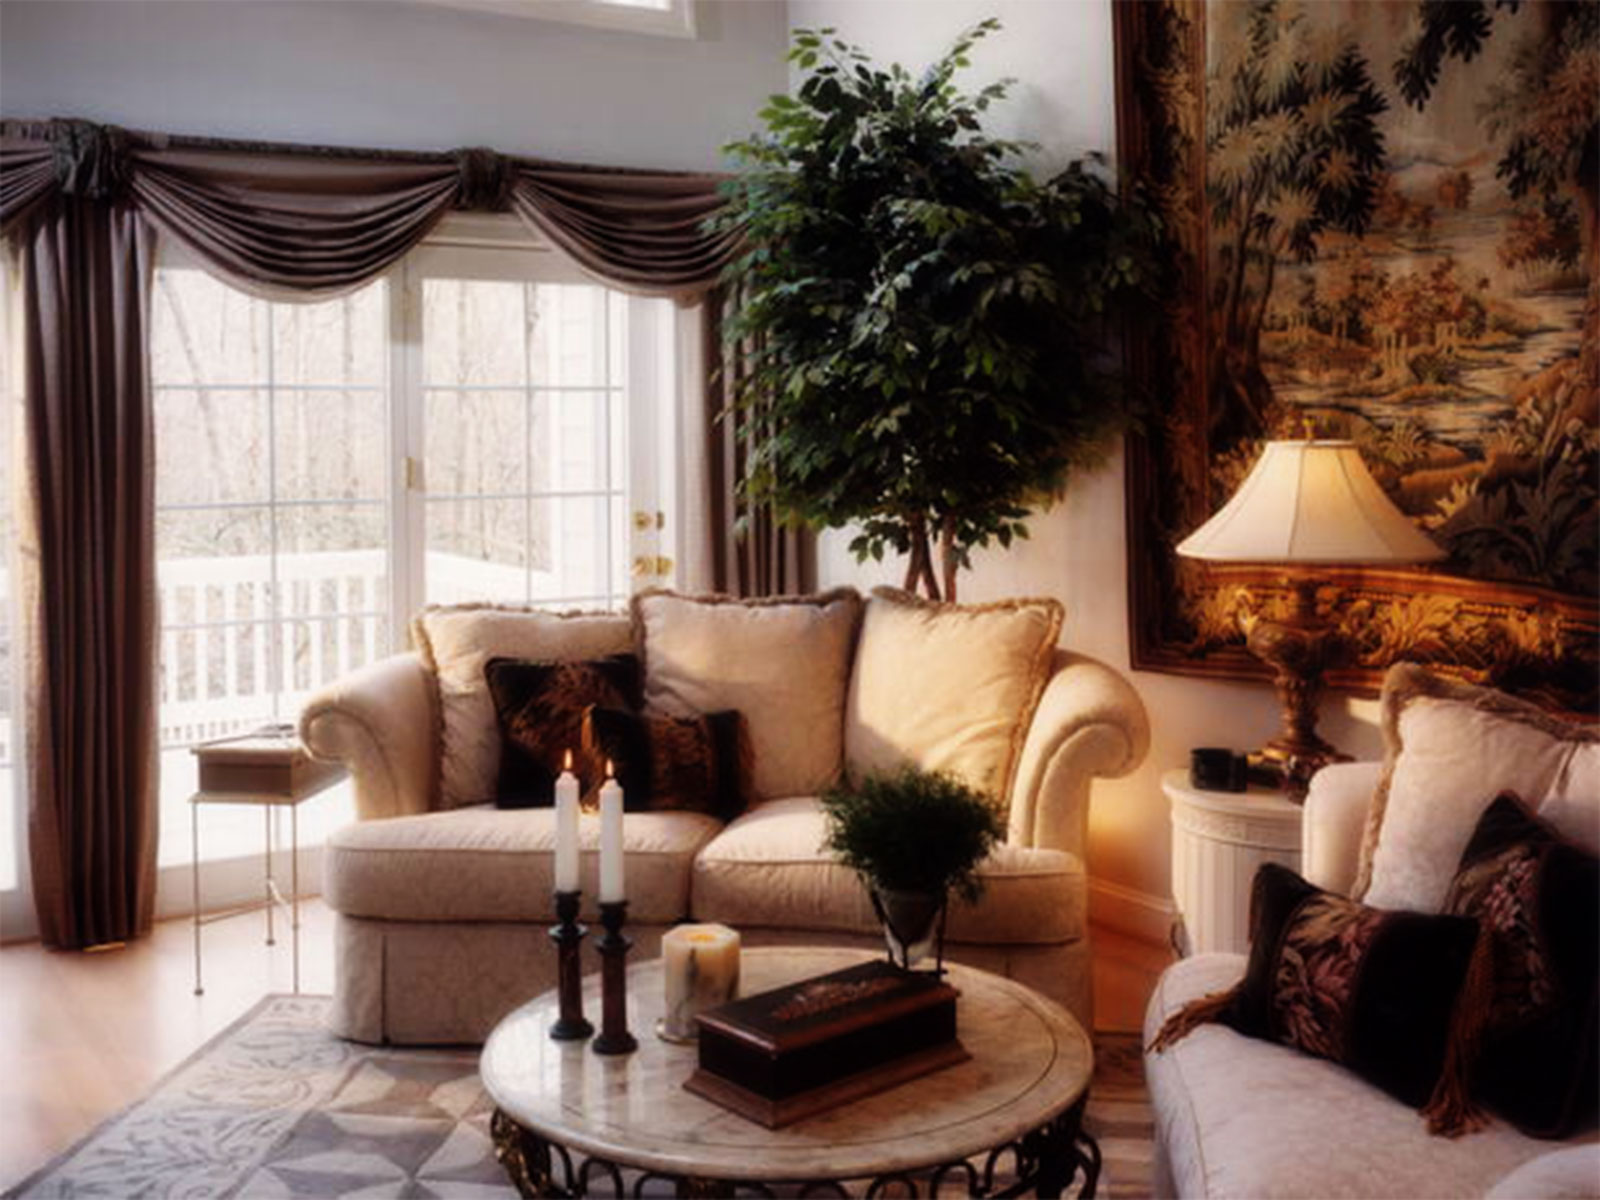 living room ideas with tapestry